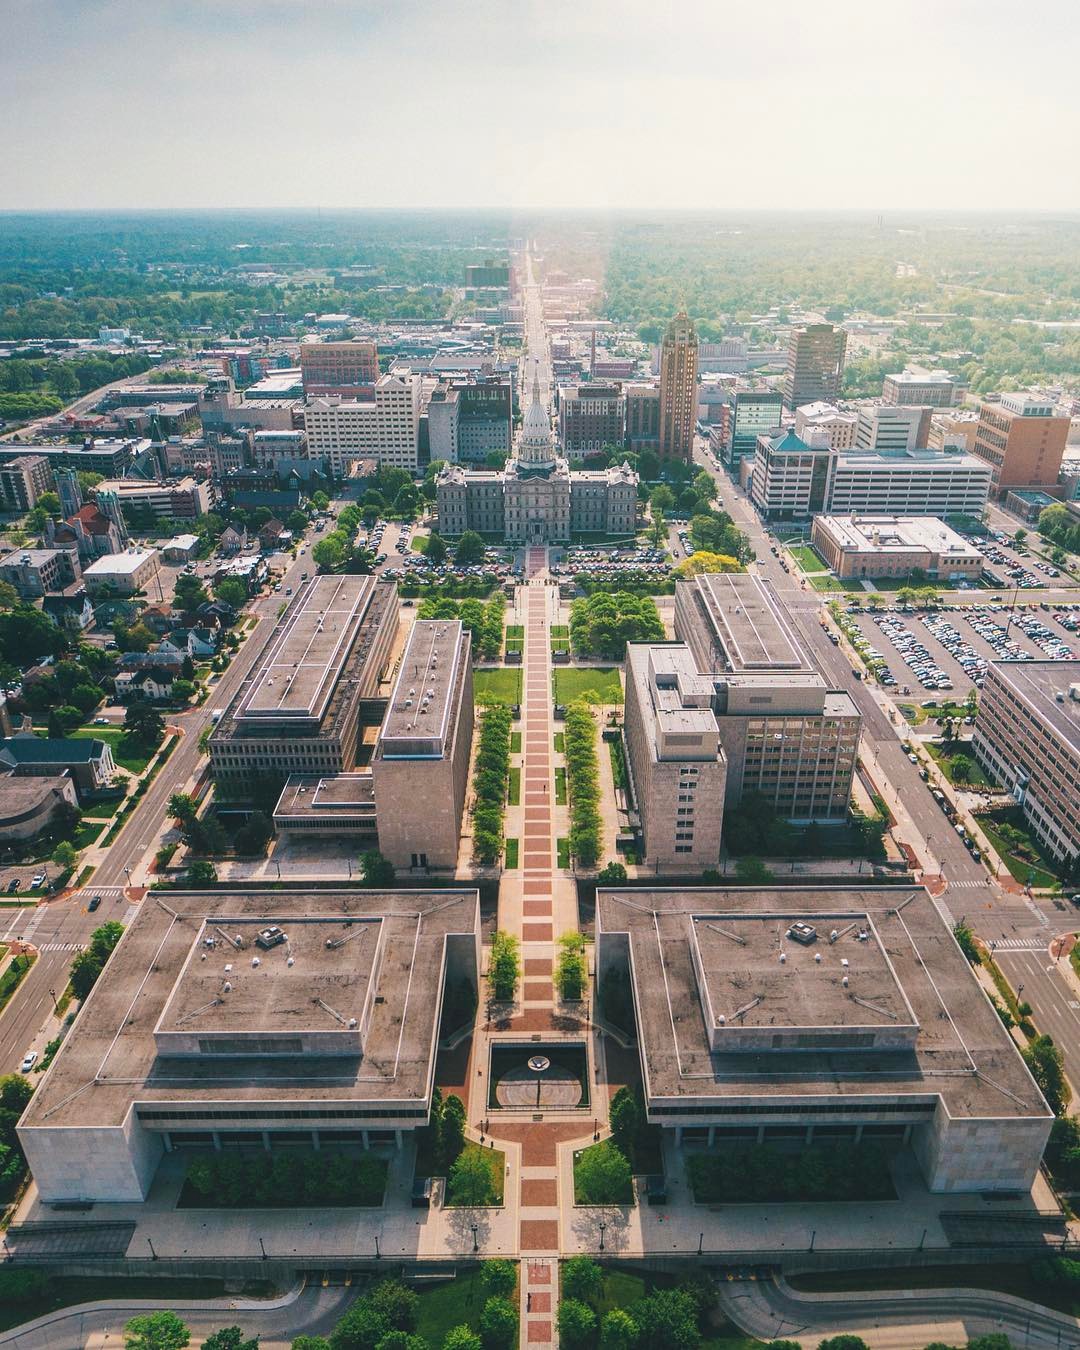 Aerial View of Downtown Lansing, MI and the Michigan State House. Photo by Instagram user @drewmason